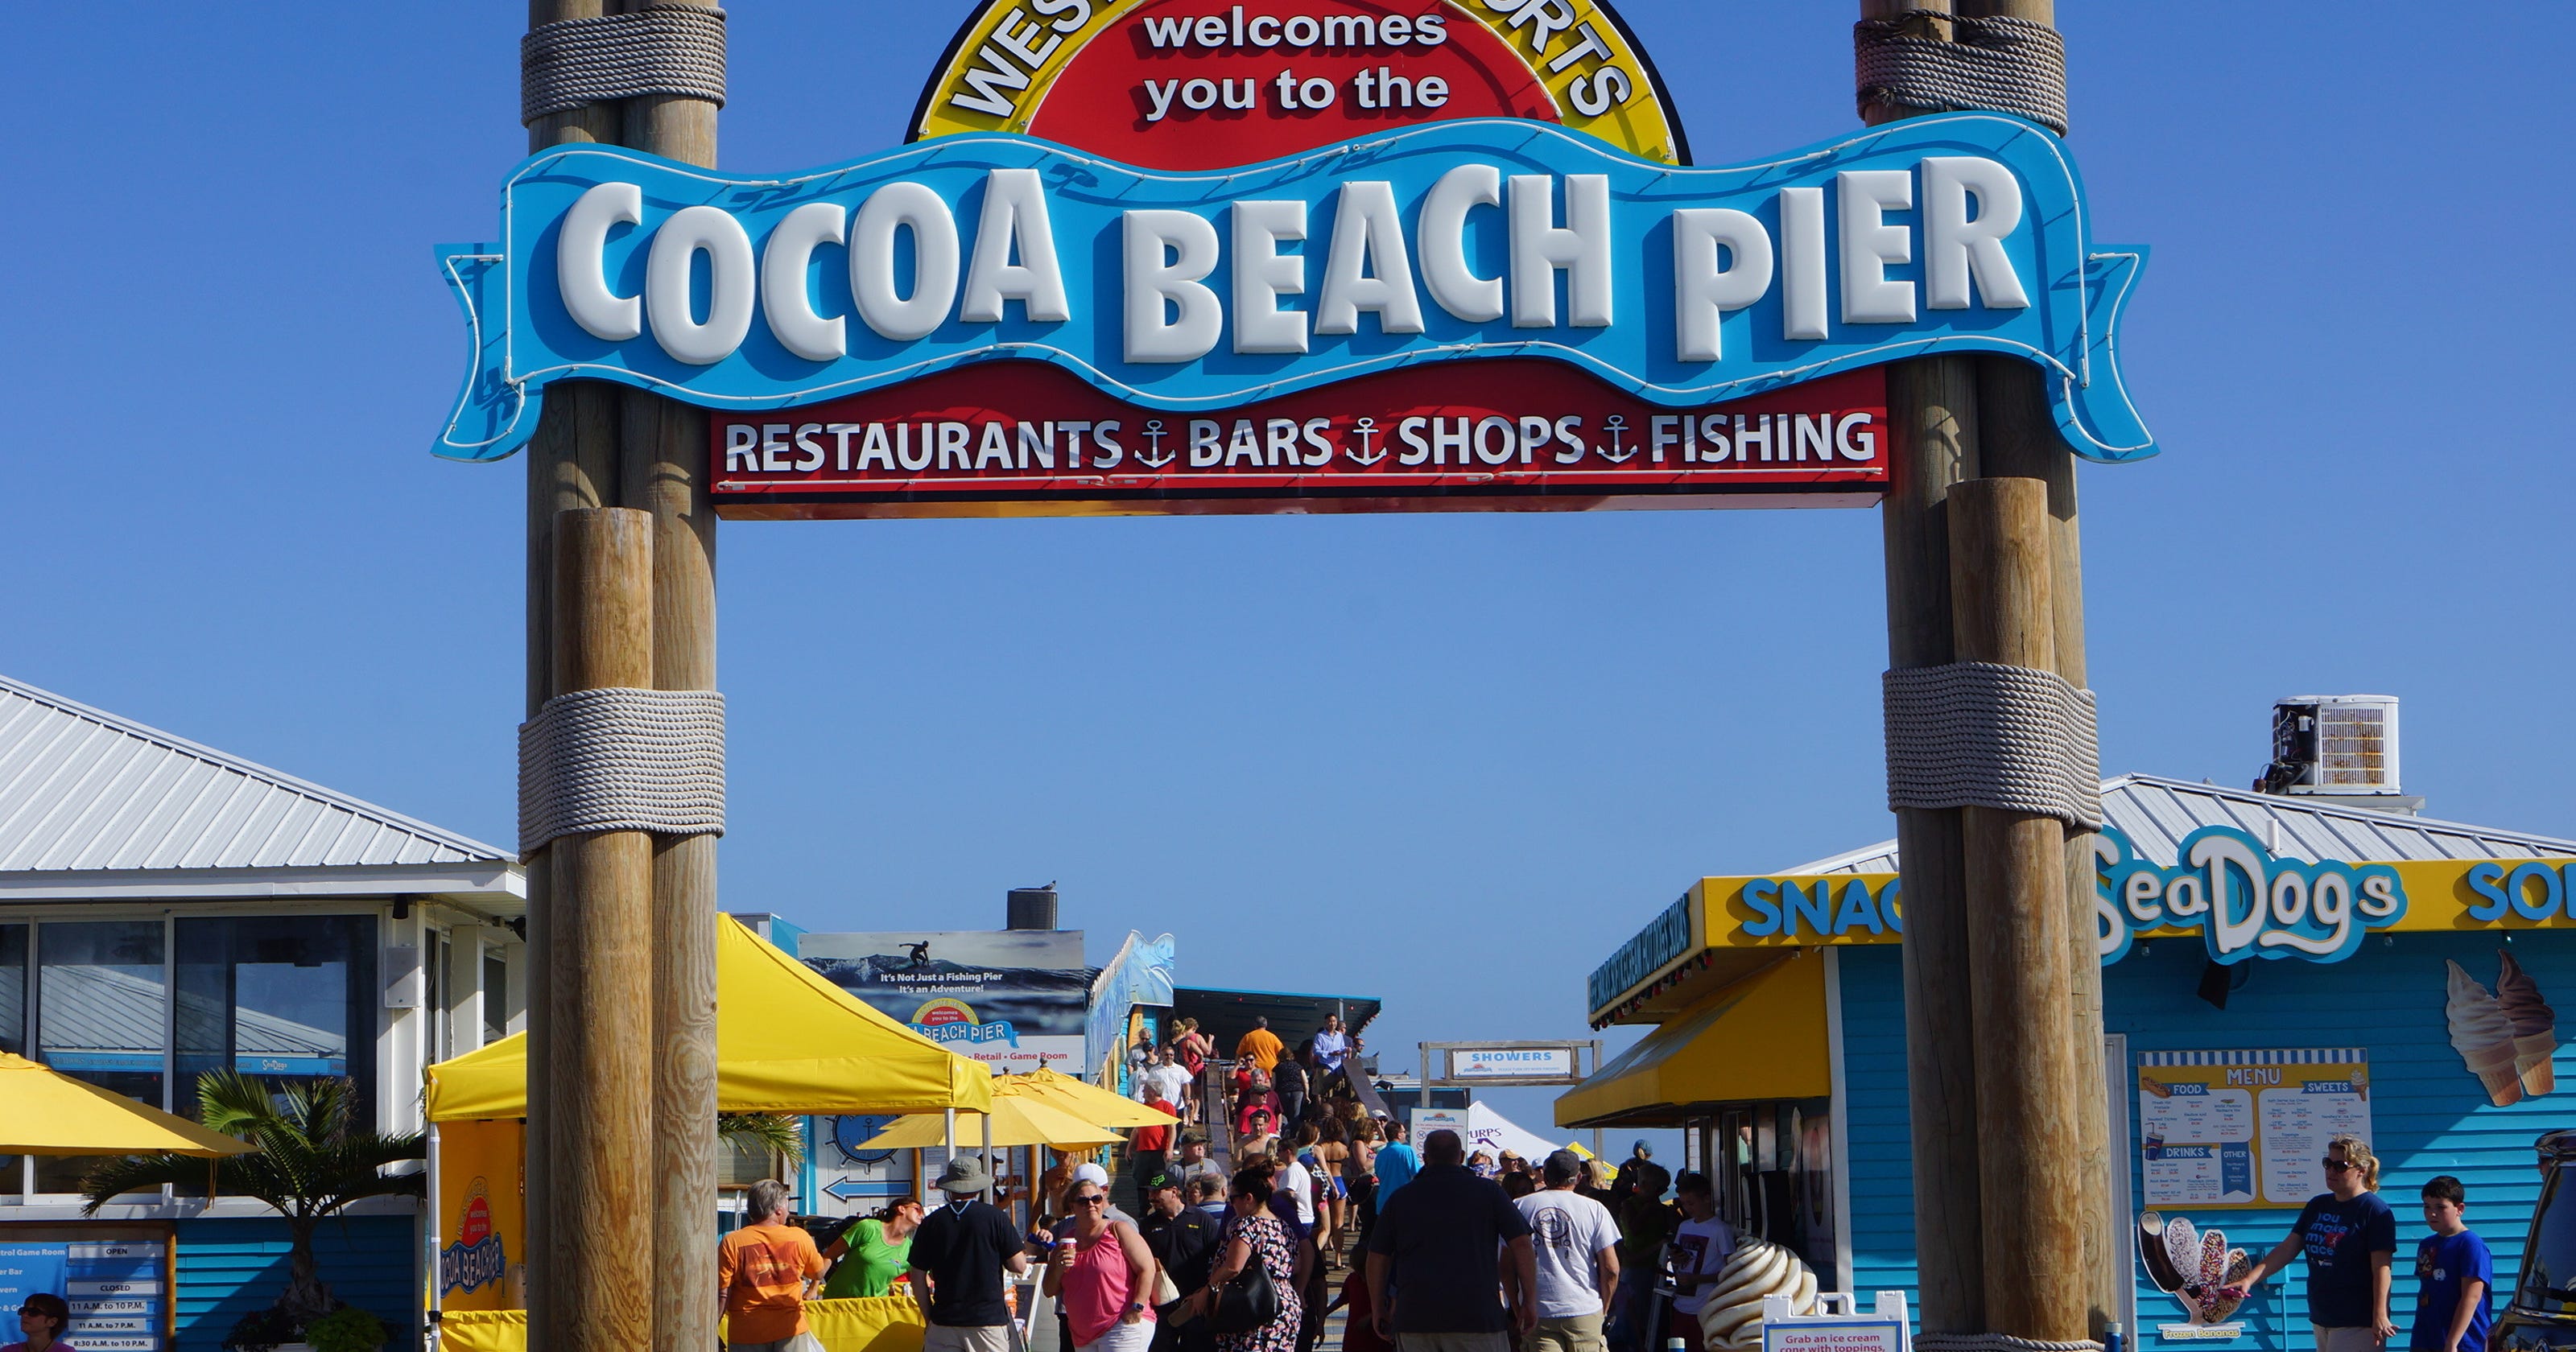 Cocoa Beach Pier $5 million widening project in works